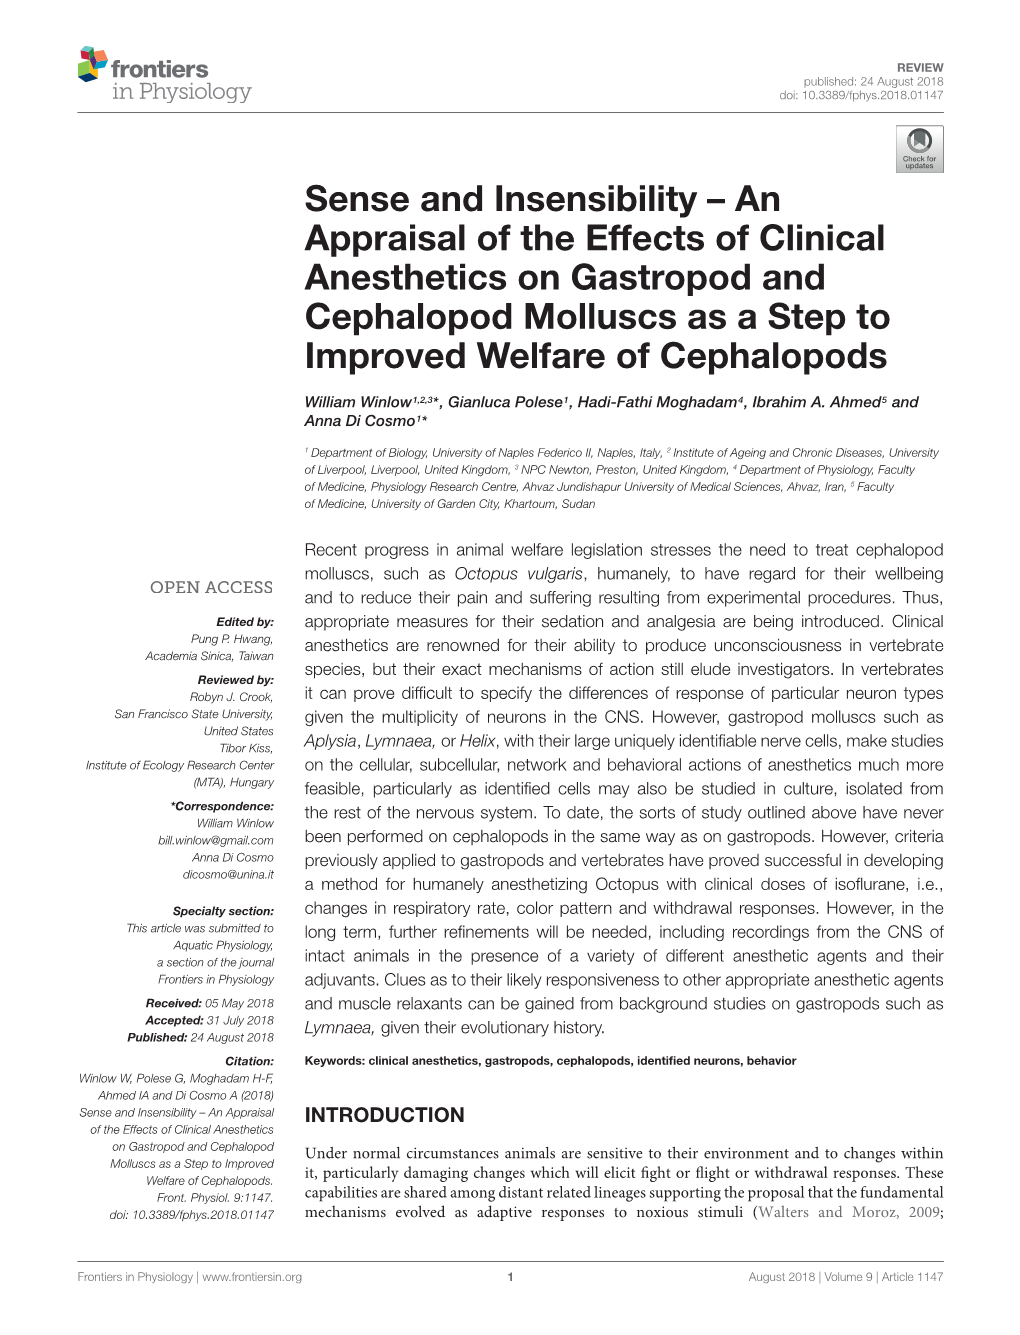 An Appraisal of the Effects of Clinical Anesthetics on Gastropod and Cephalopod Molluscs As a Step to Improved Welfare of Cephalopods